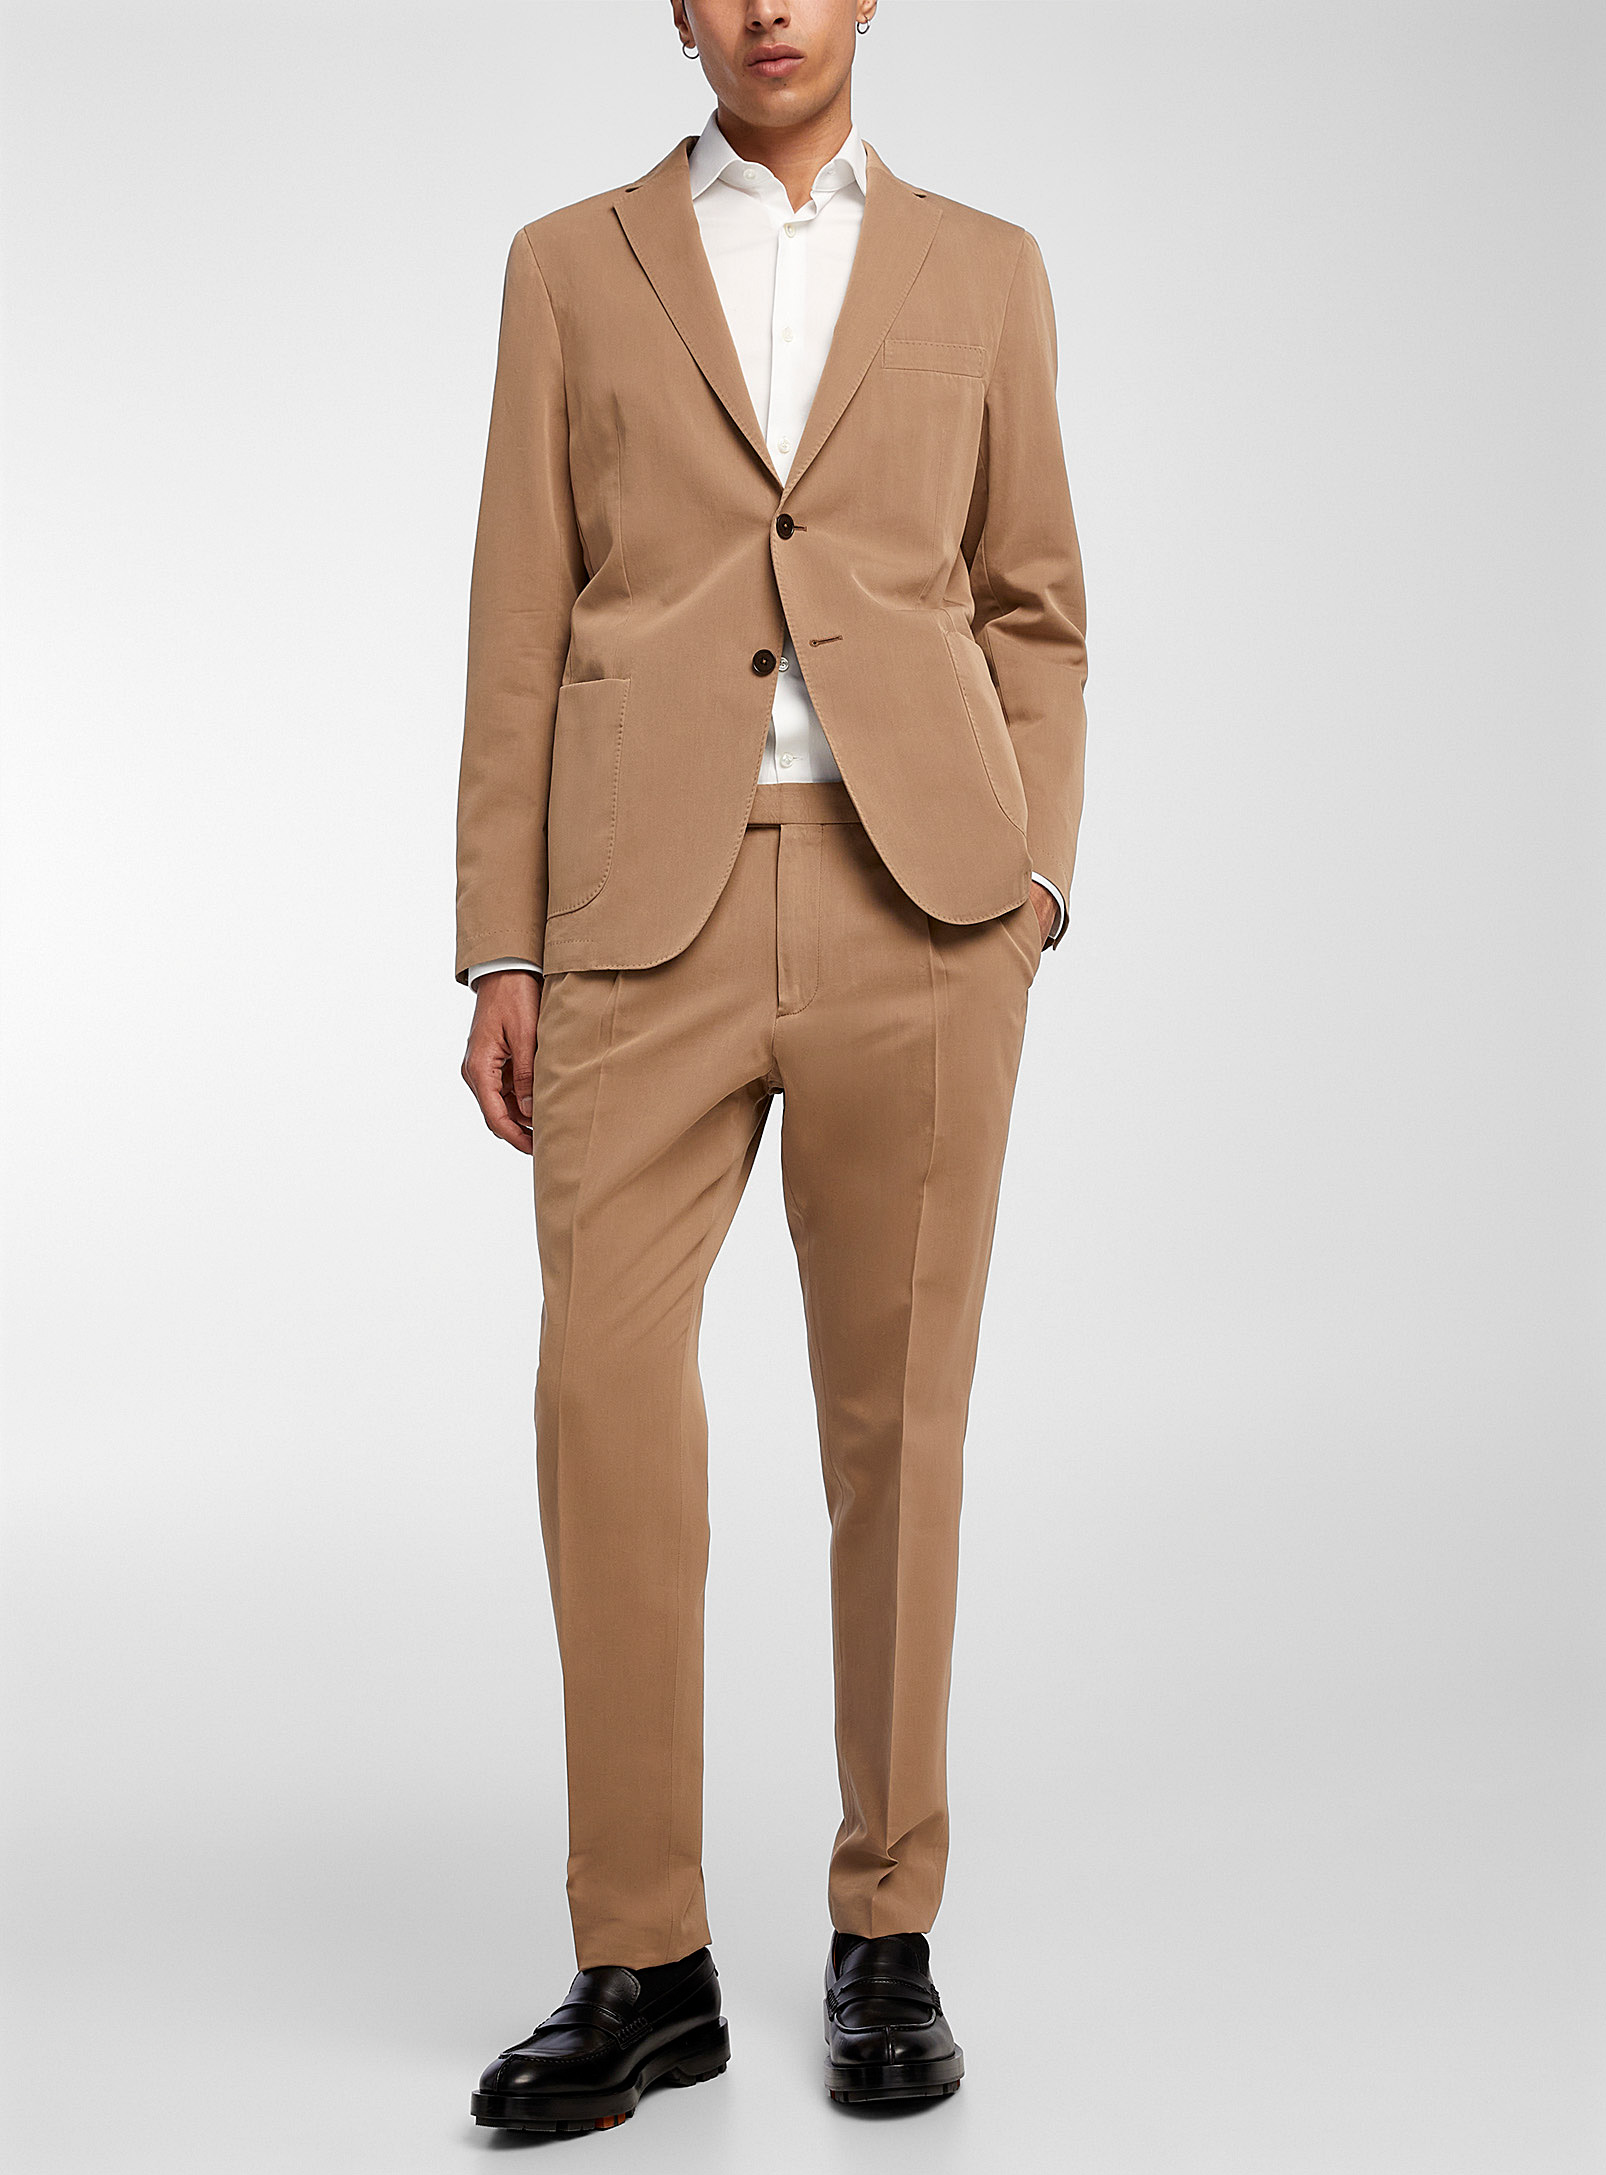 Zegna Cotton And Silk Plain Suit In Ivory/cream Beige